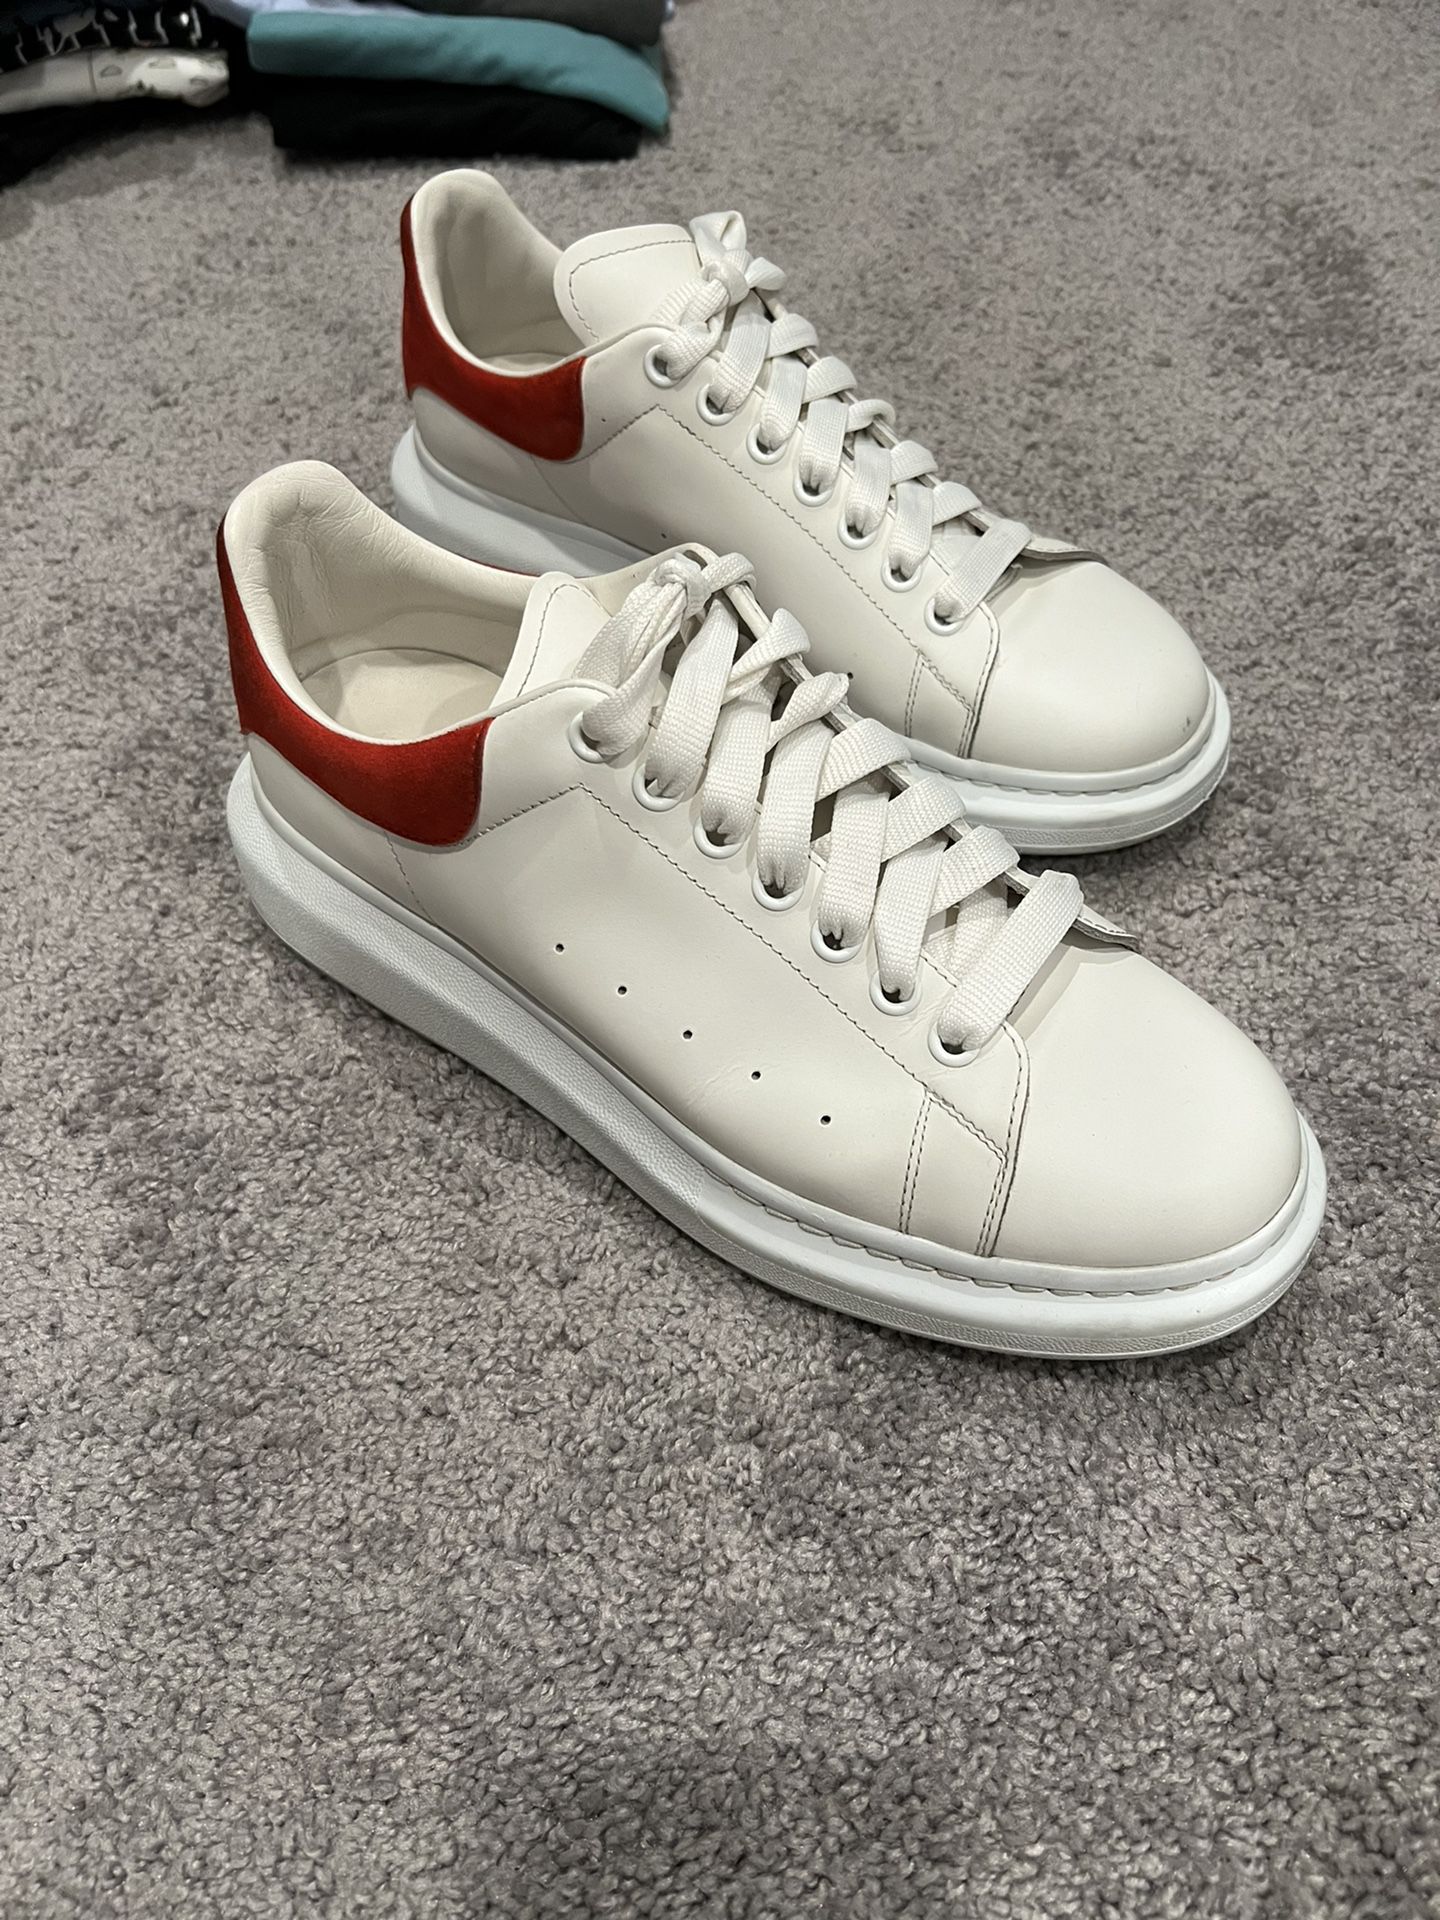 Alexander McQueen Mens Shoes Size 12 for Sale in Indian Springs, NV -  OfferUp